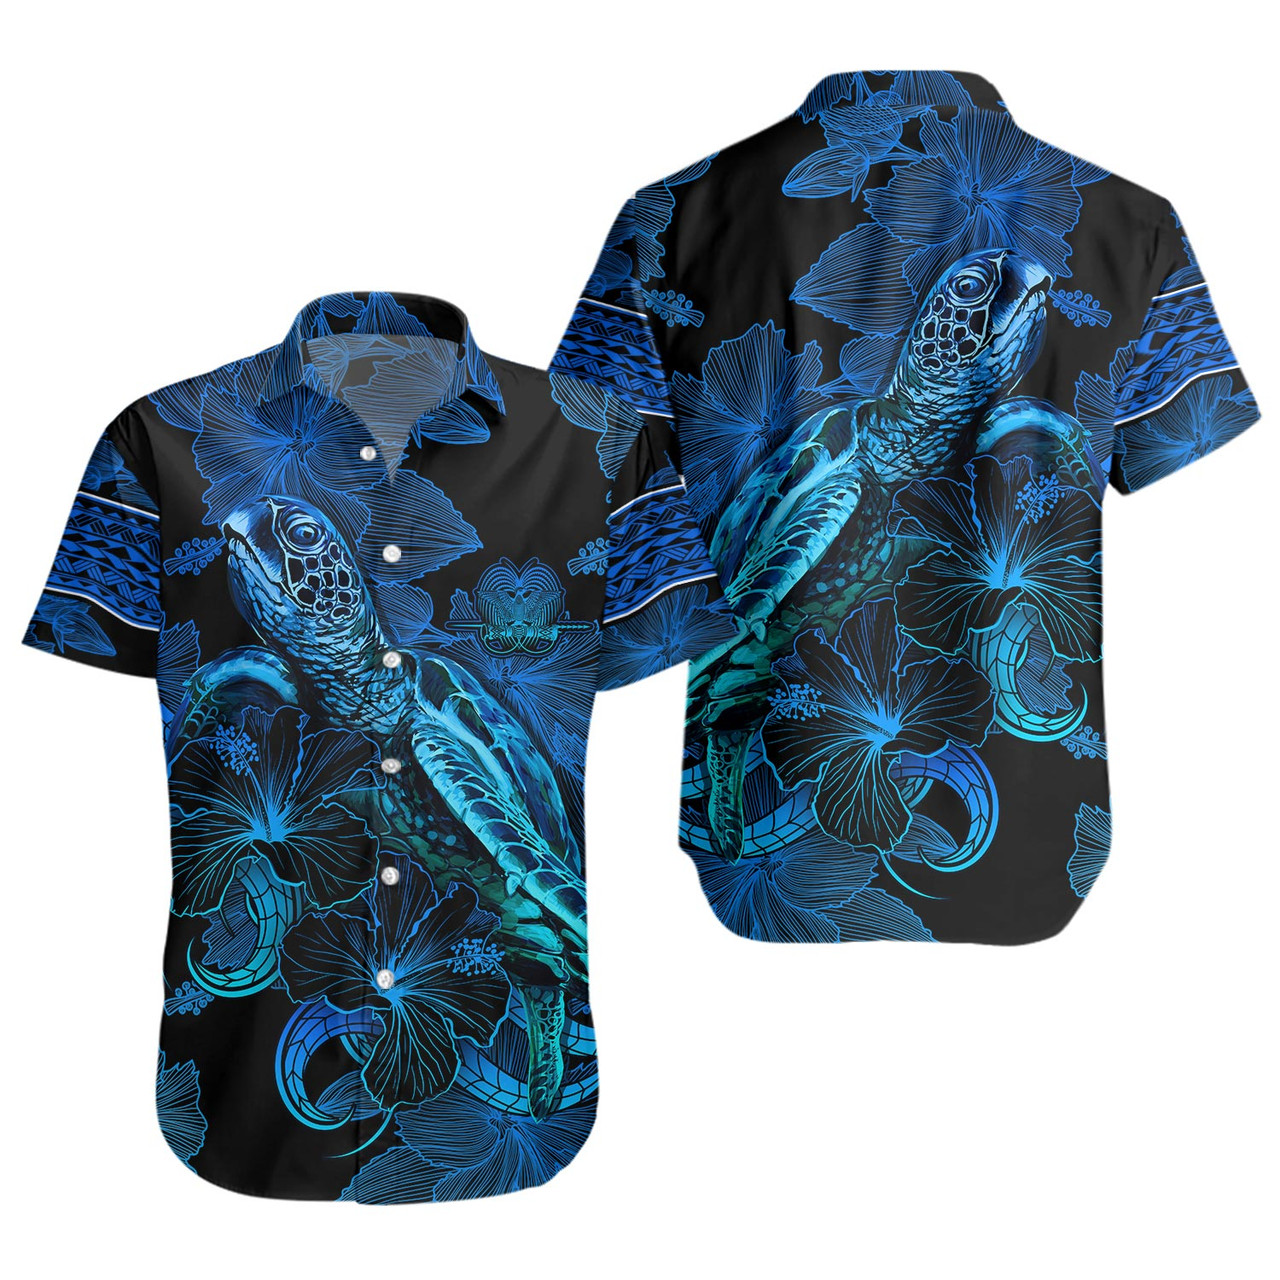 Papua New Guinea Short Sleeve Shirt Sea Turtle With Blooming Hibiscus Flowers Tribal Blue